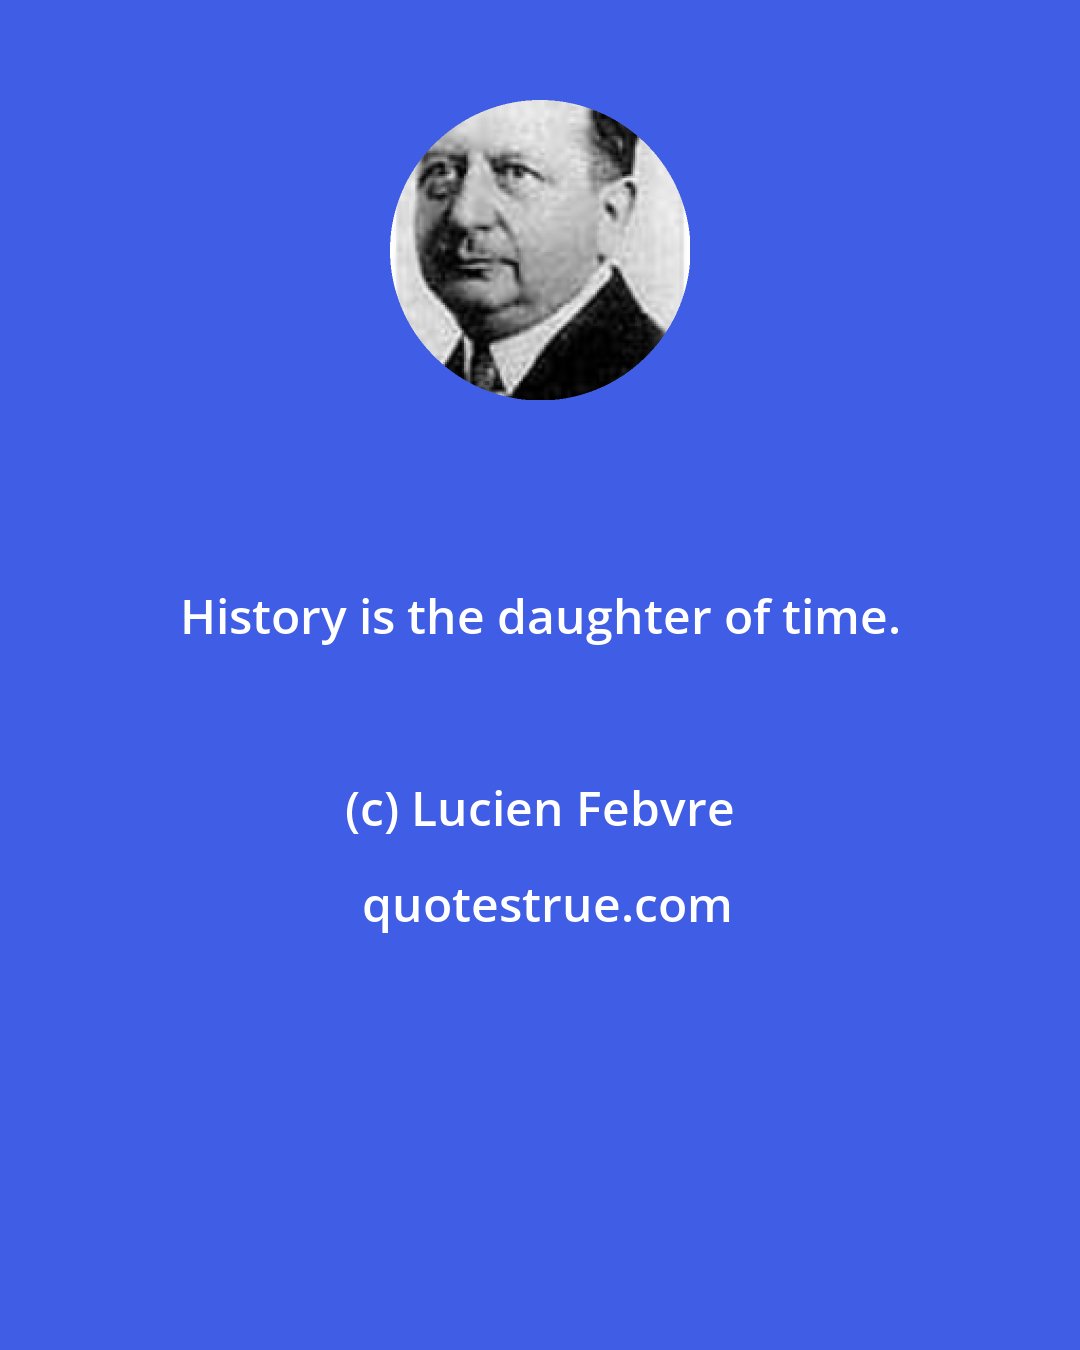 Lucien Febvre: History is the daughter of time.